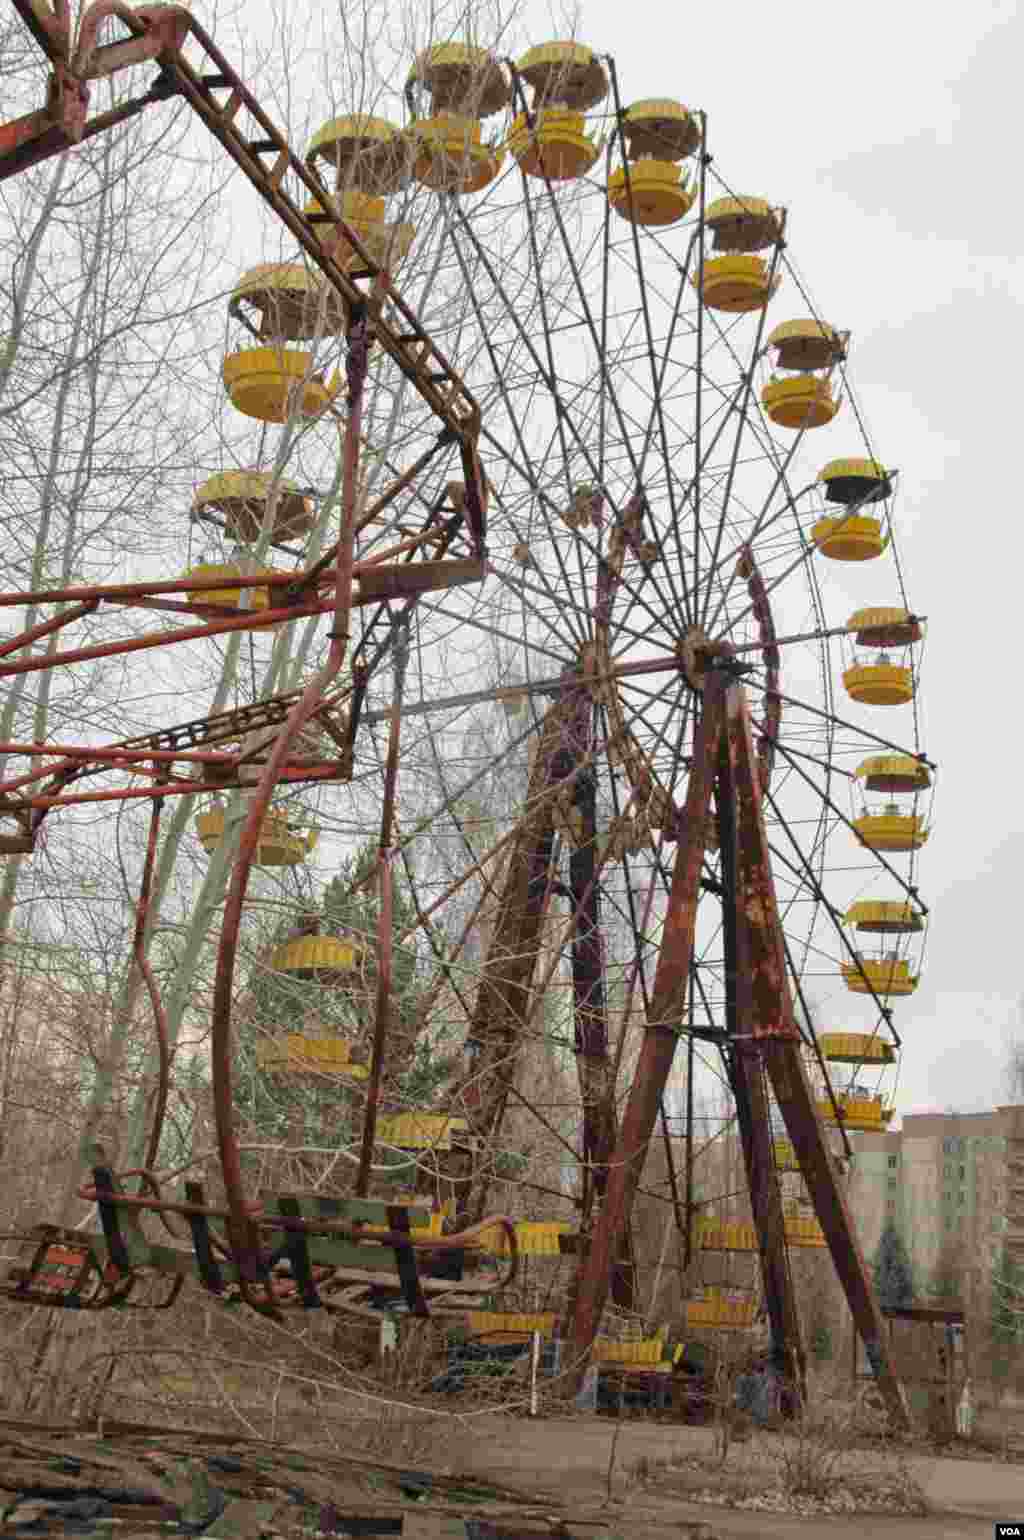 The ferris wheel at the abandoned Pripyat amusement park adjacent to Chernobyl, March 20, 2014. (S. Herman/VOA)